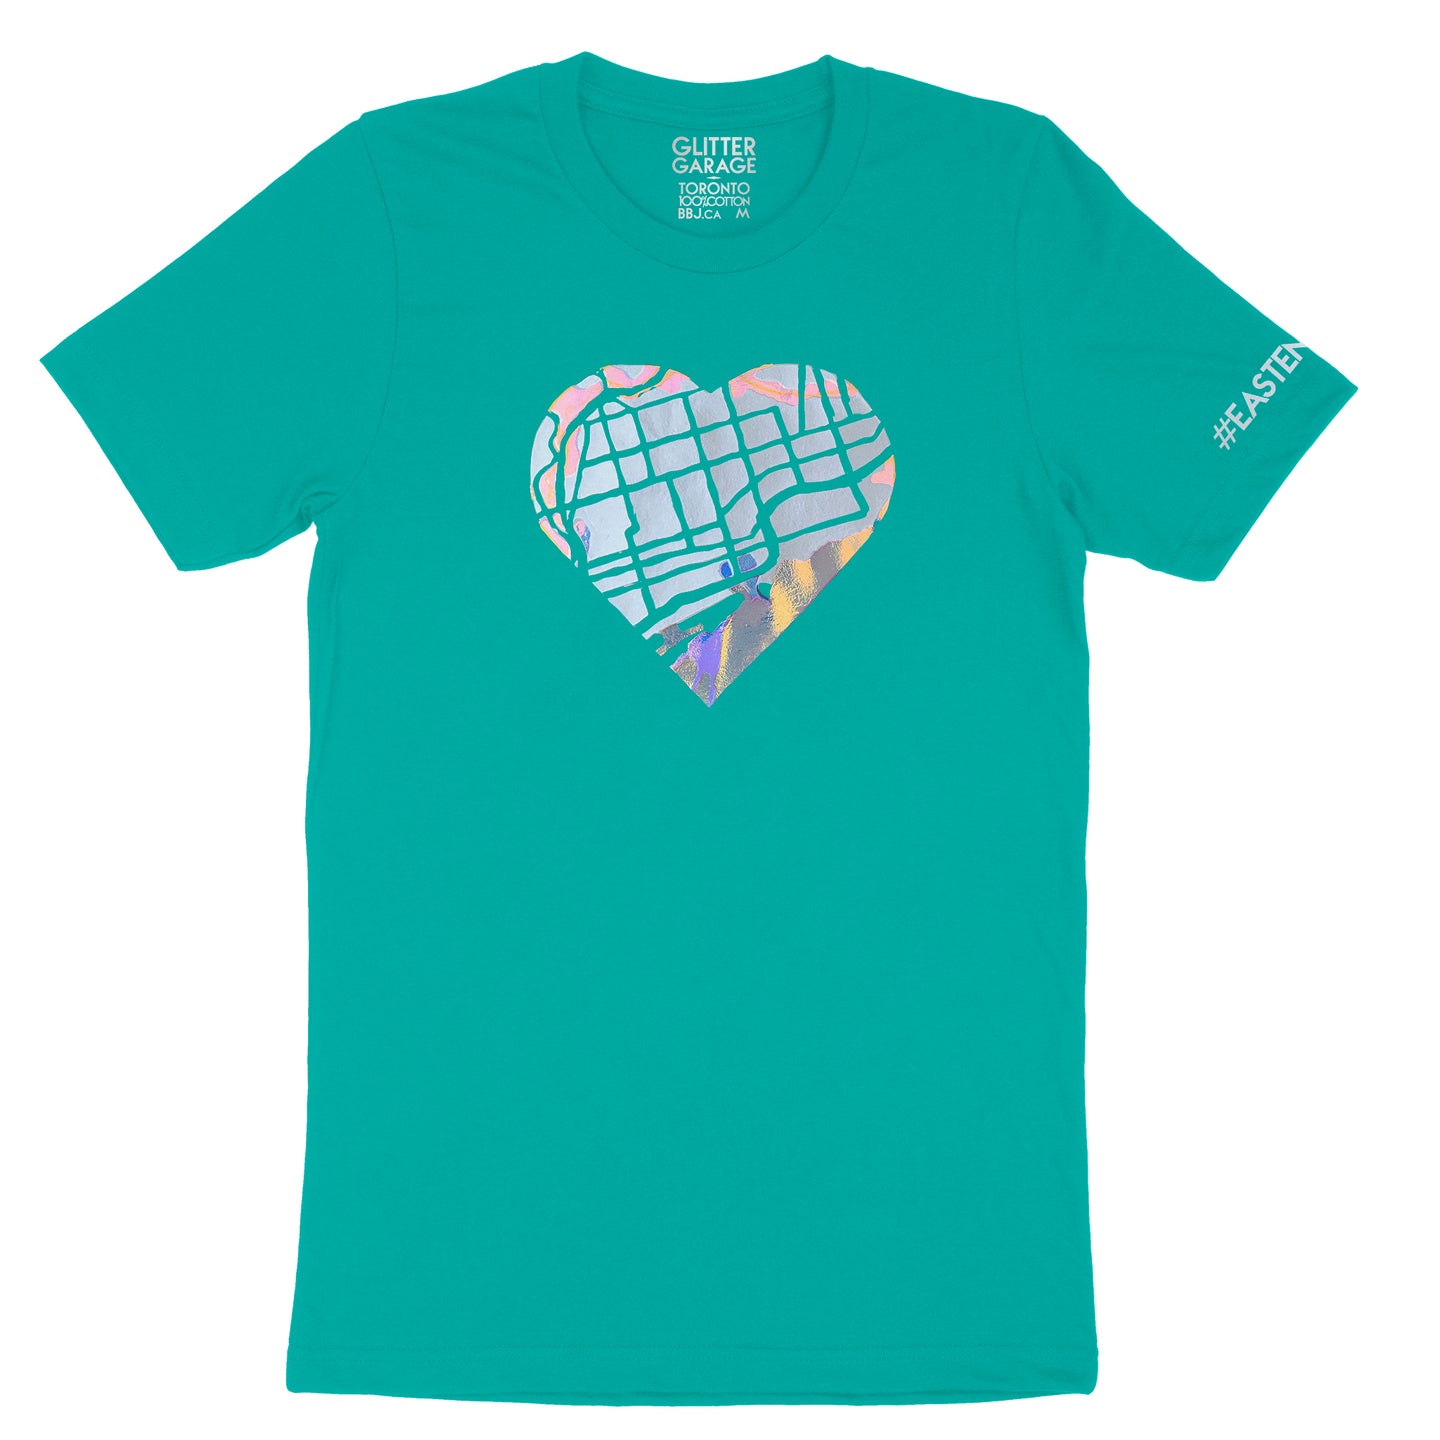 East End Love teal unisex tee with heart-shaped map in silver and opal vinyl - by BBJ in collaboration with East End Arts